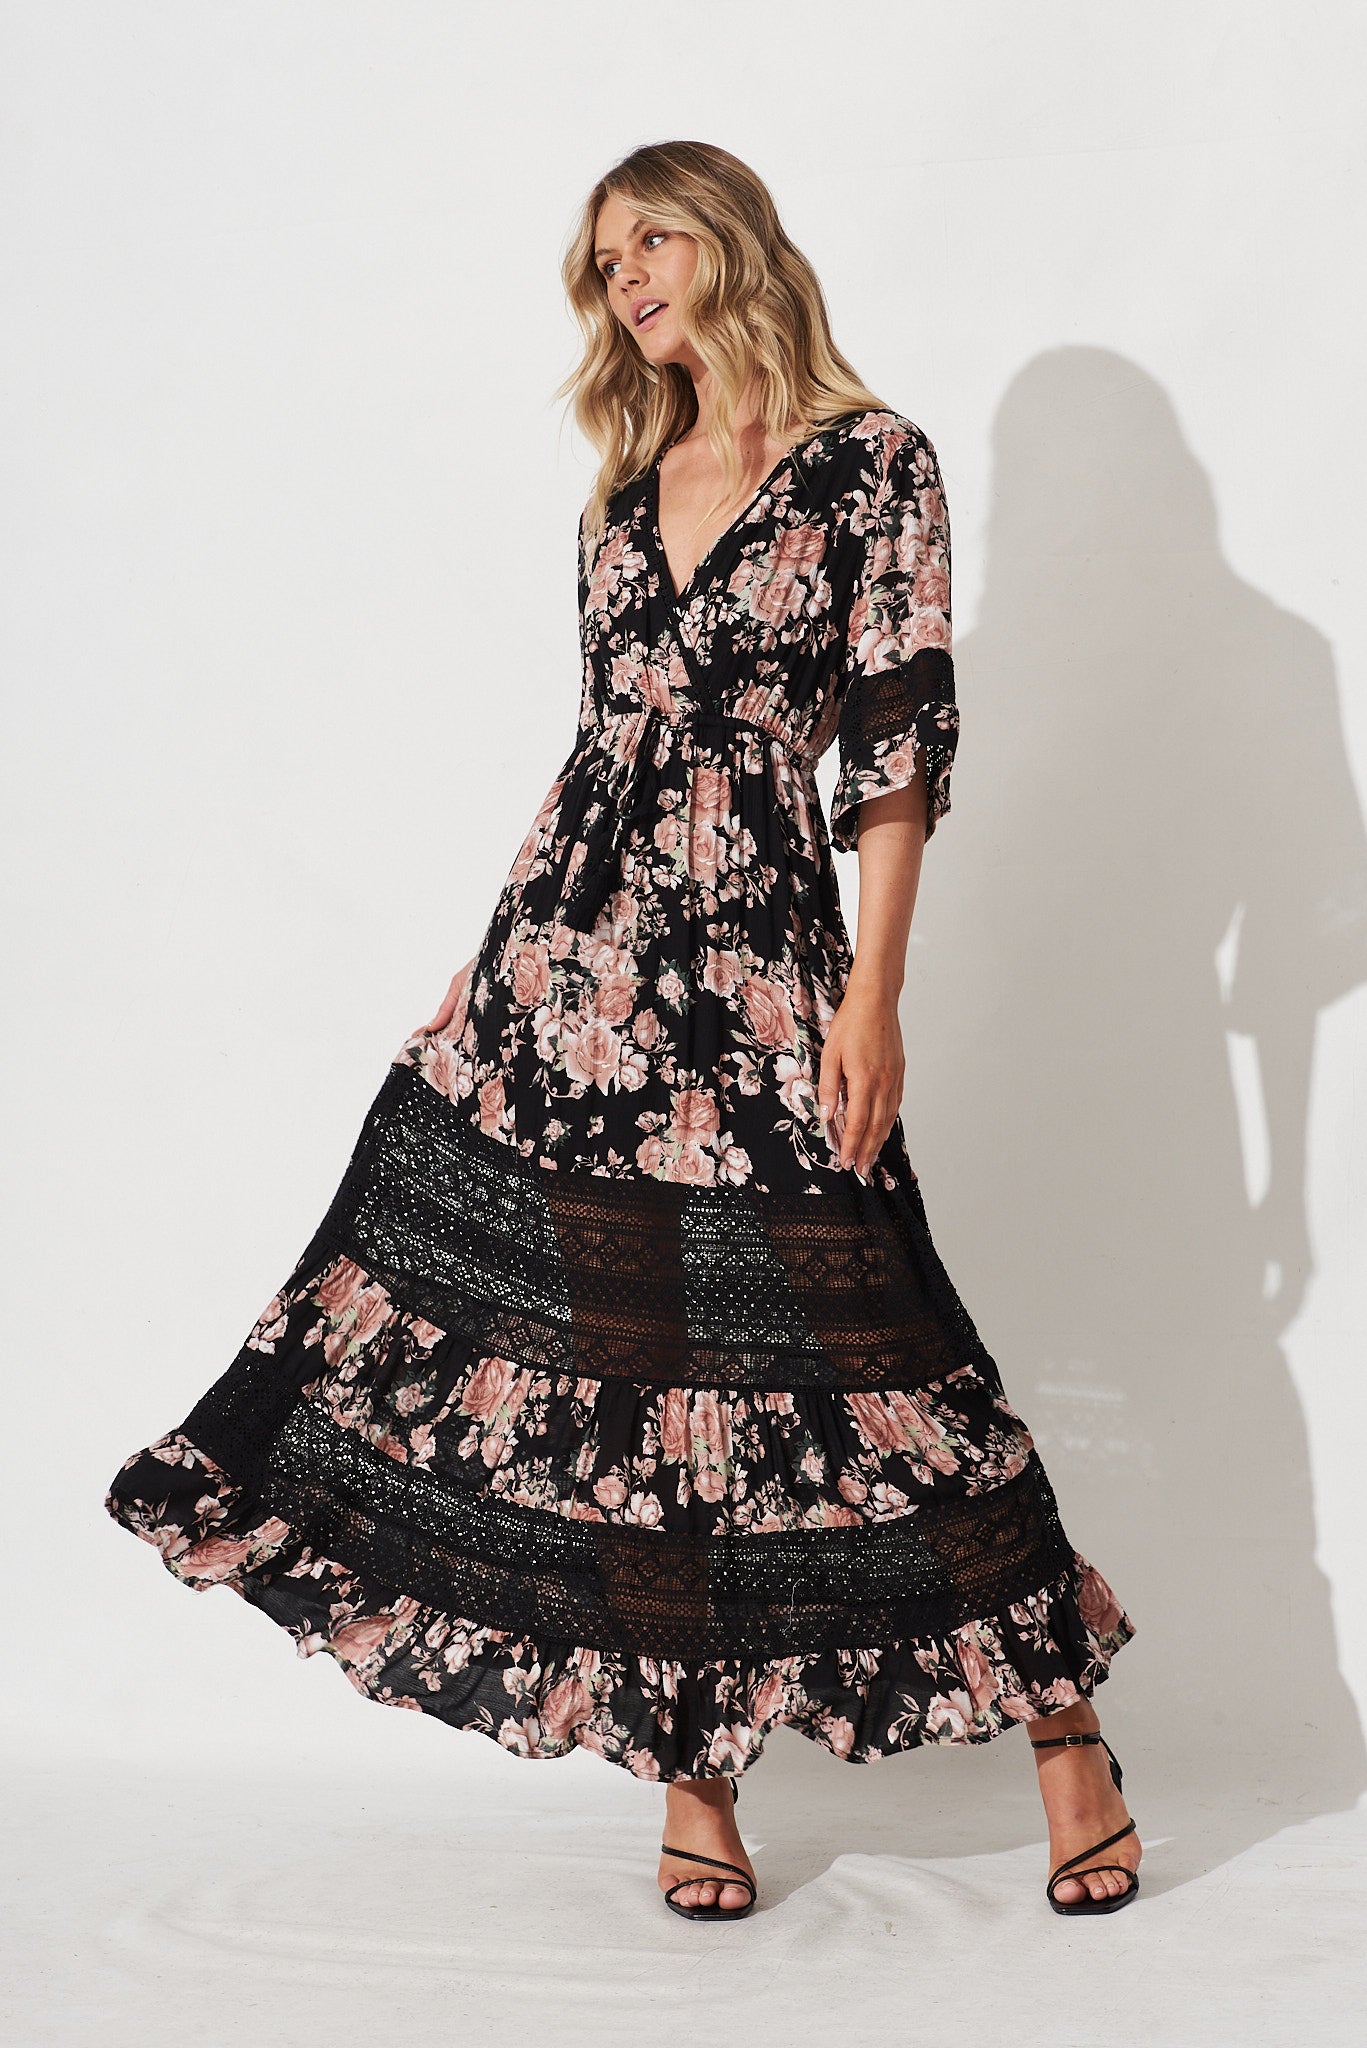 Roxy Maxi Dress In Black And Pink Floral - Full Length